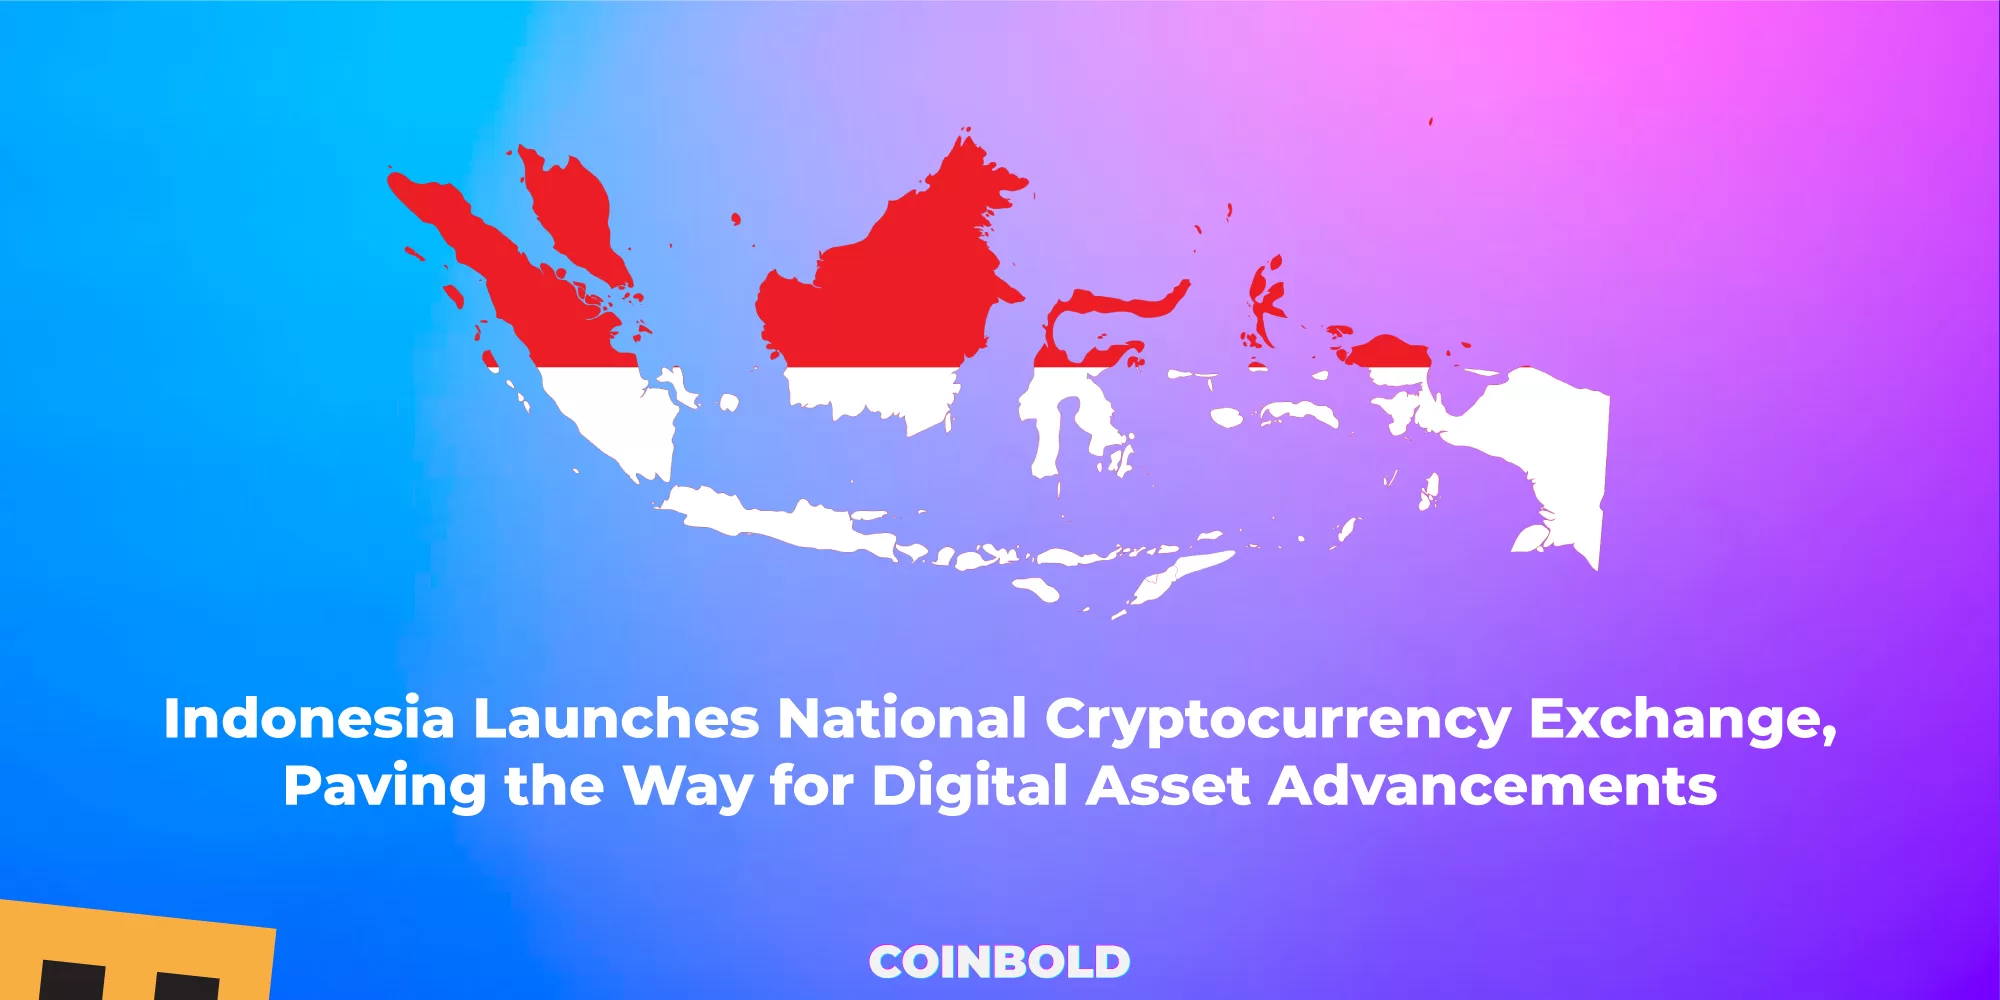 Indonesia Launches National Cryptocurrency Exchange, Paving the Way for Digital Asset Advancements